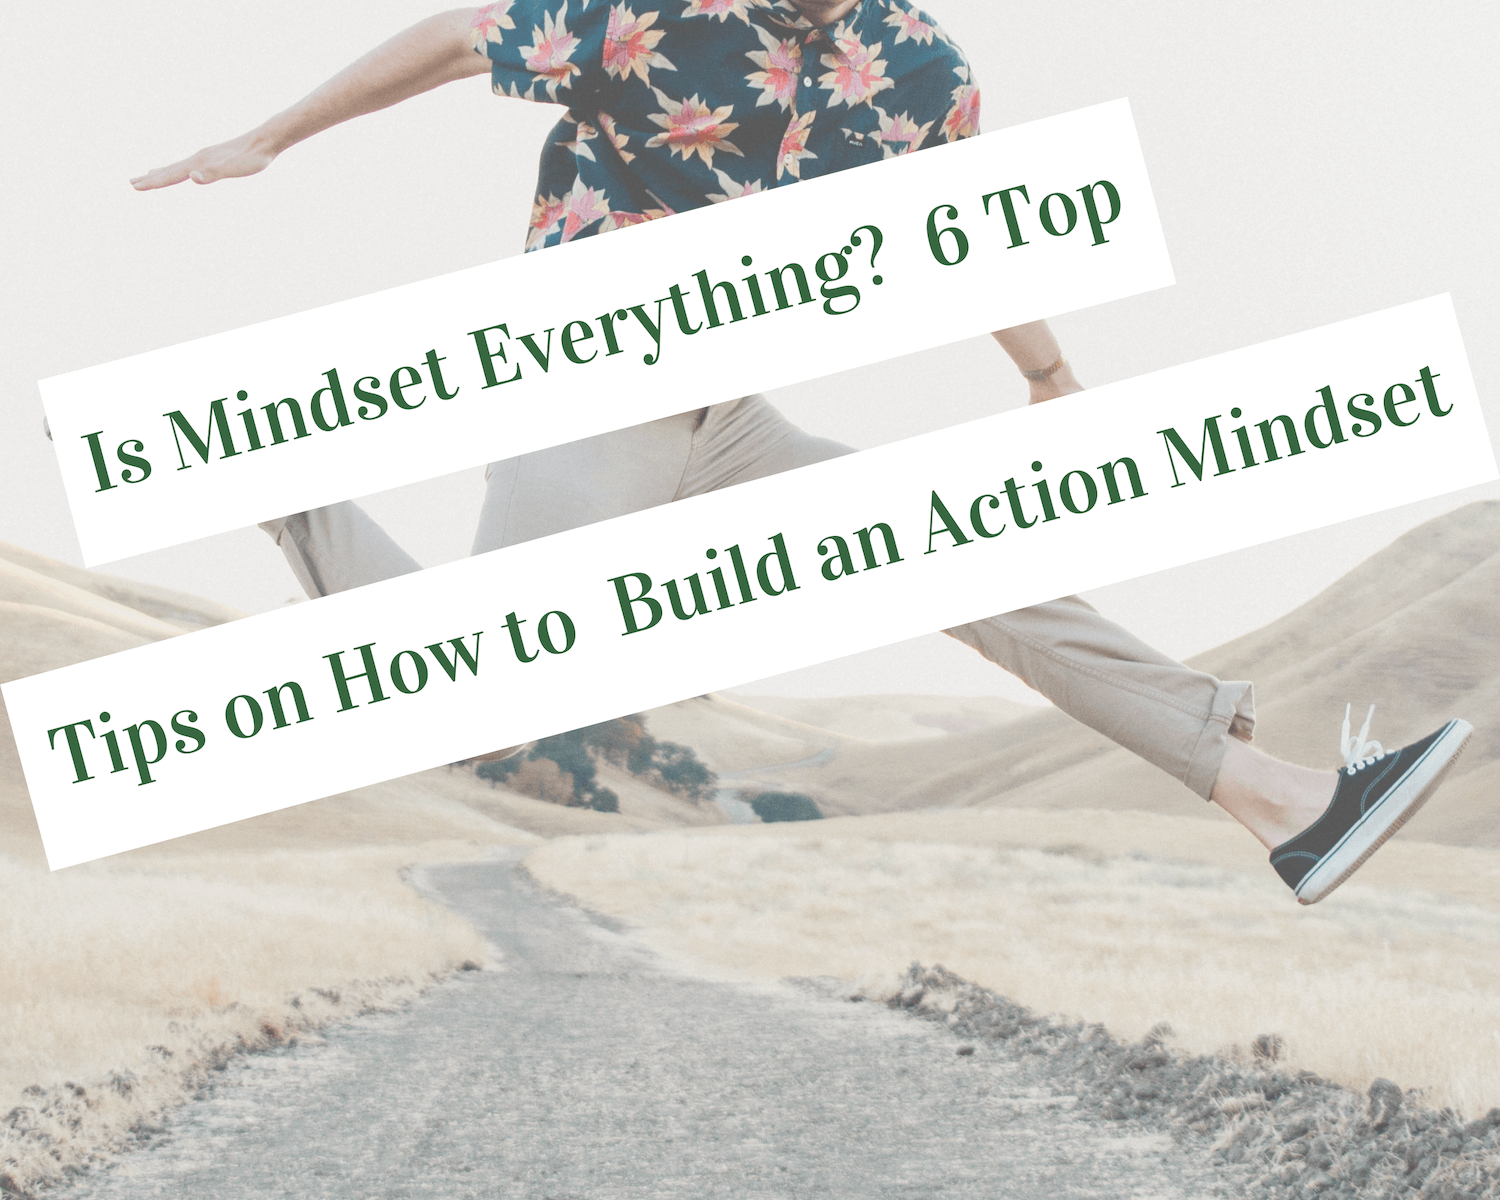 Is mindset everything? featured image